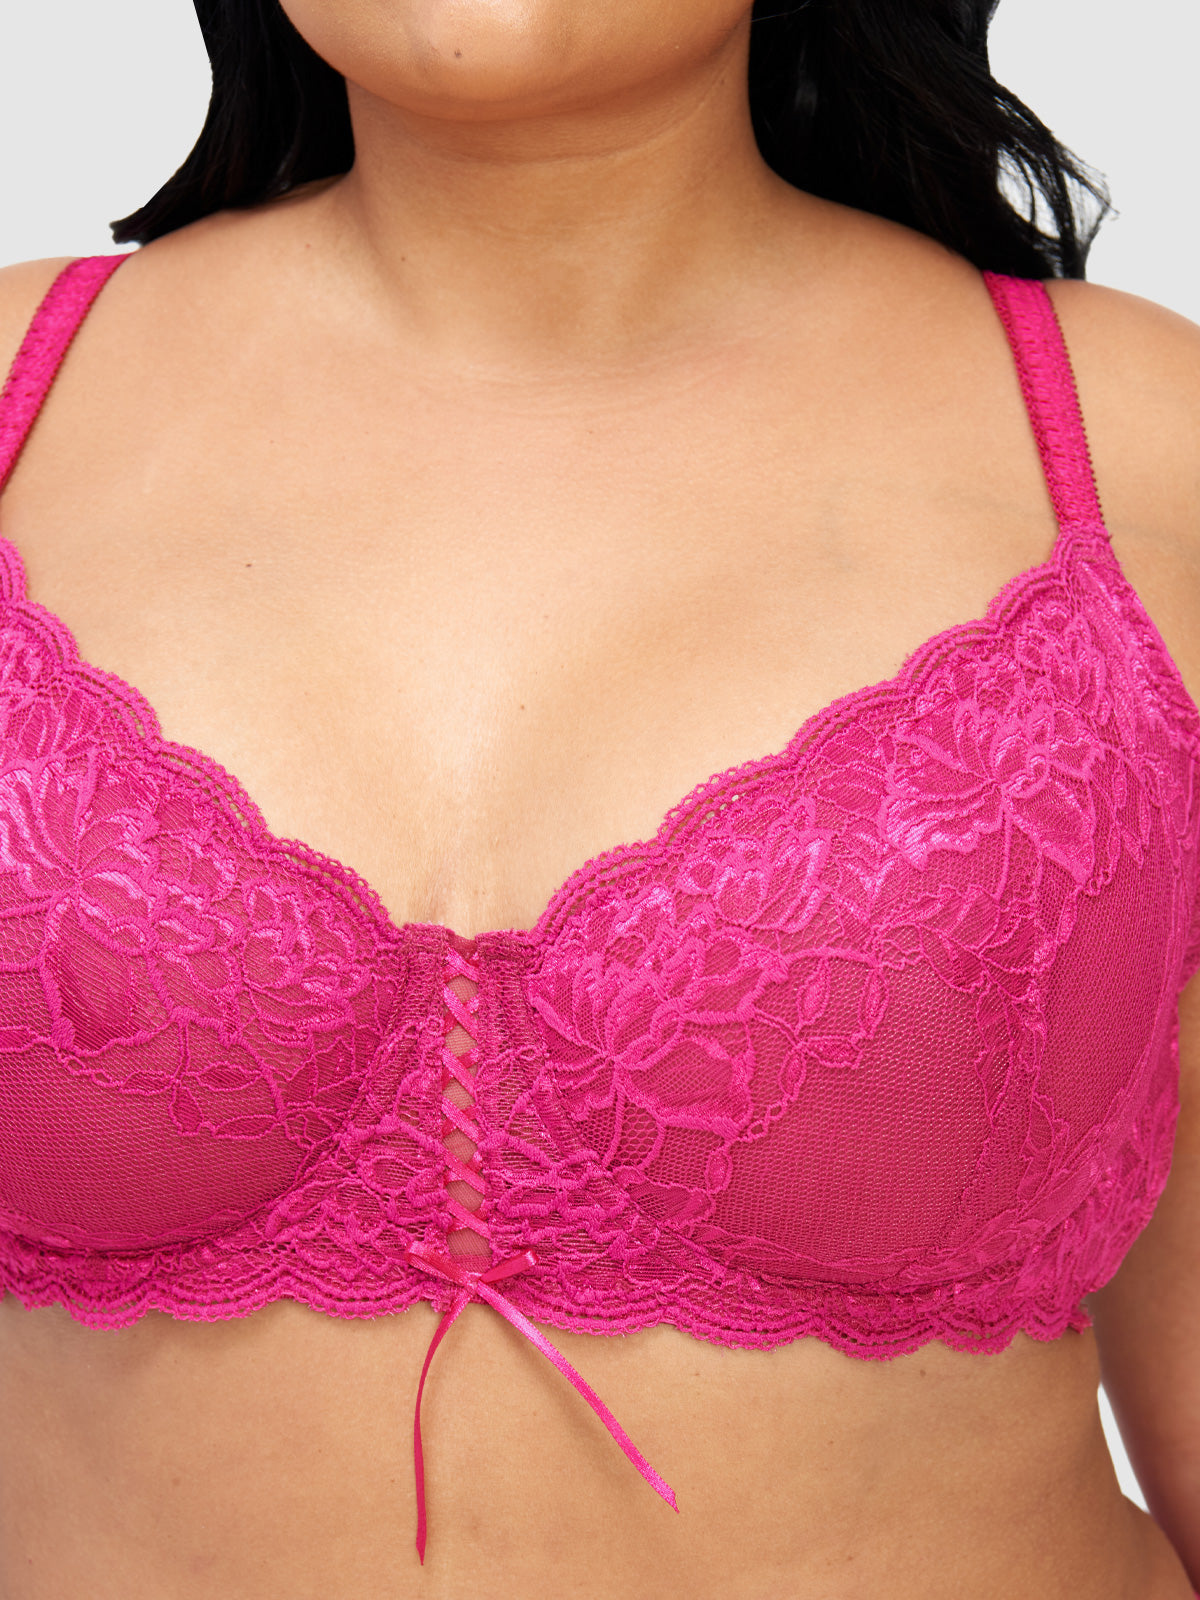 Fredericks of Hollywood Size 32F Bra Pink Full Coverage Underwire